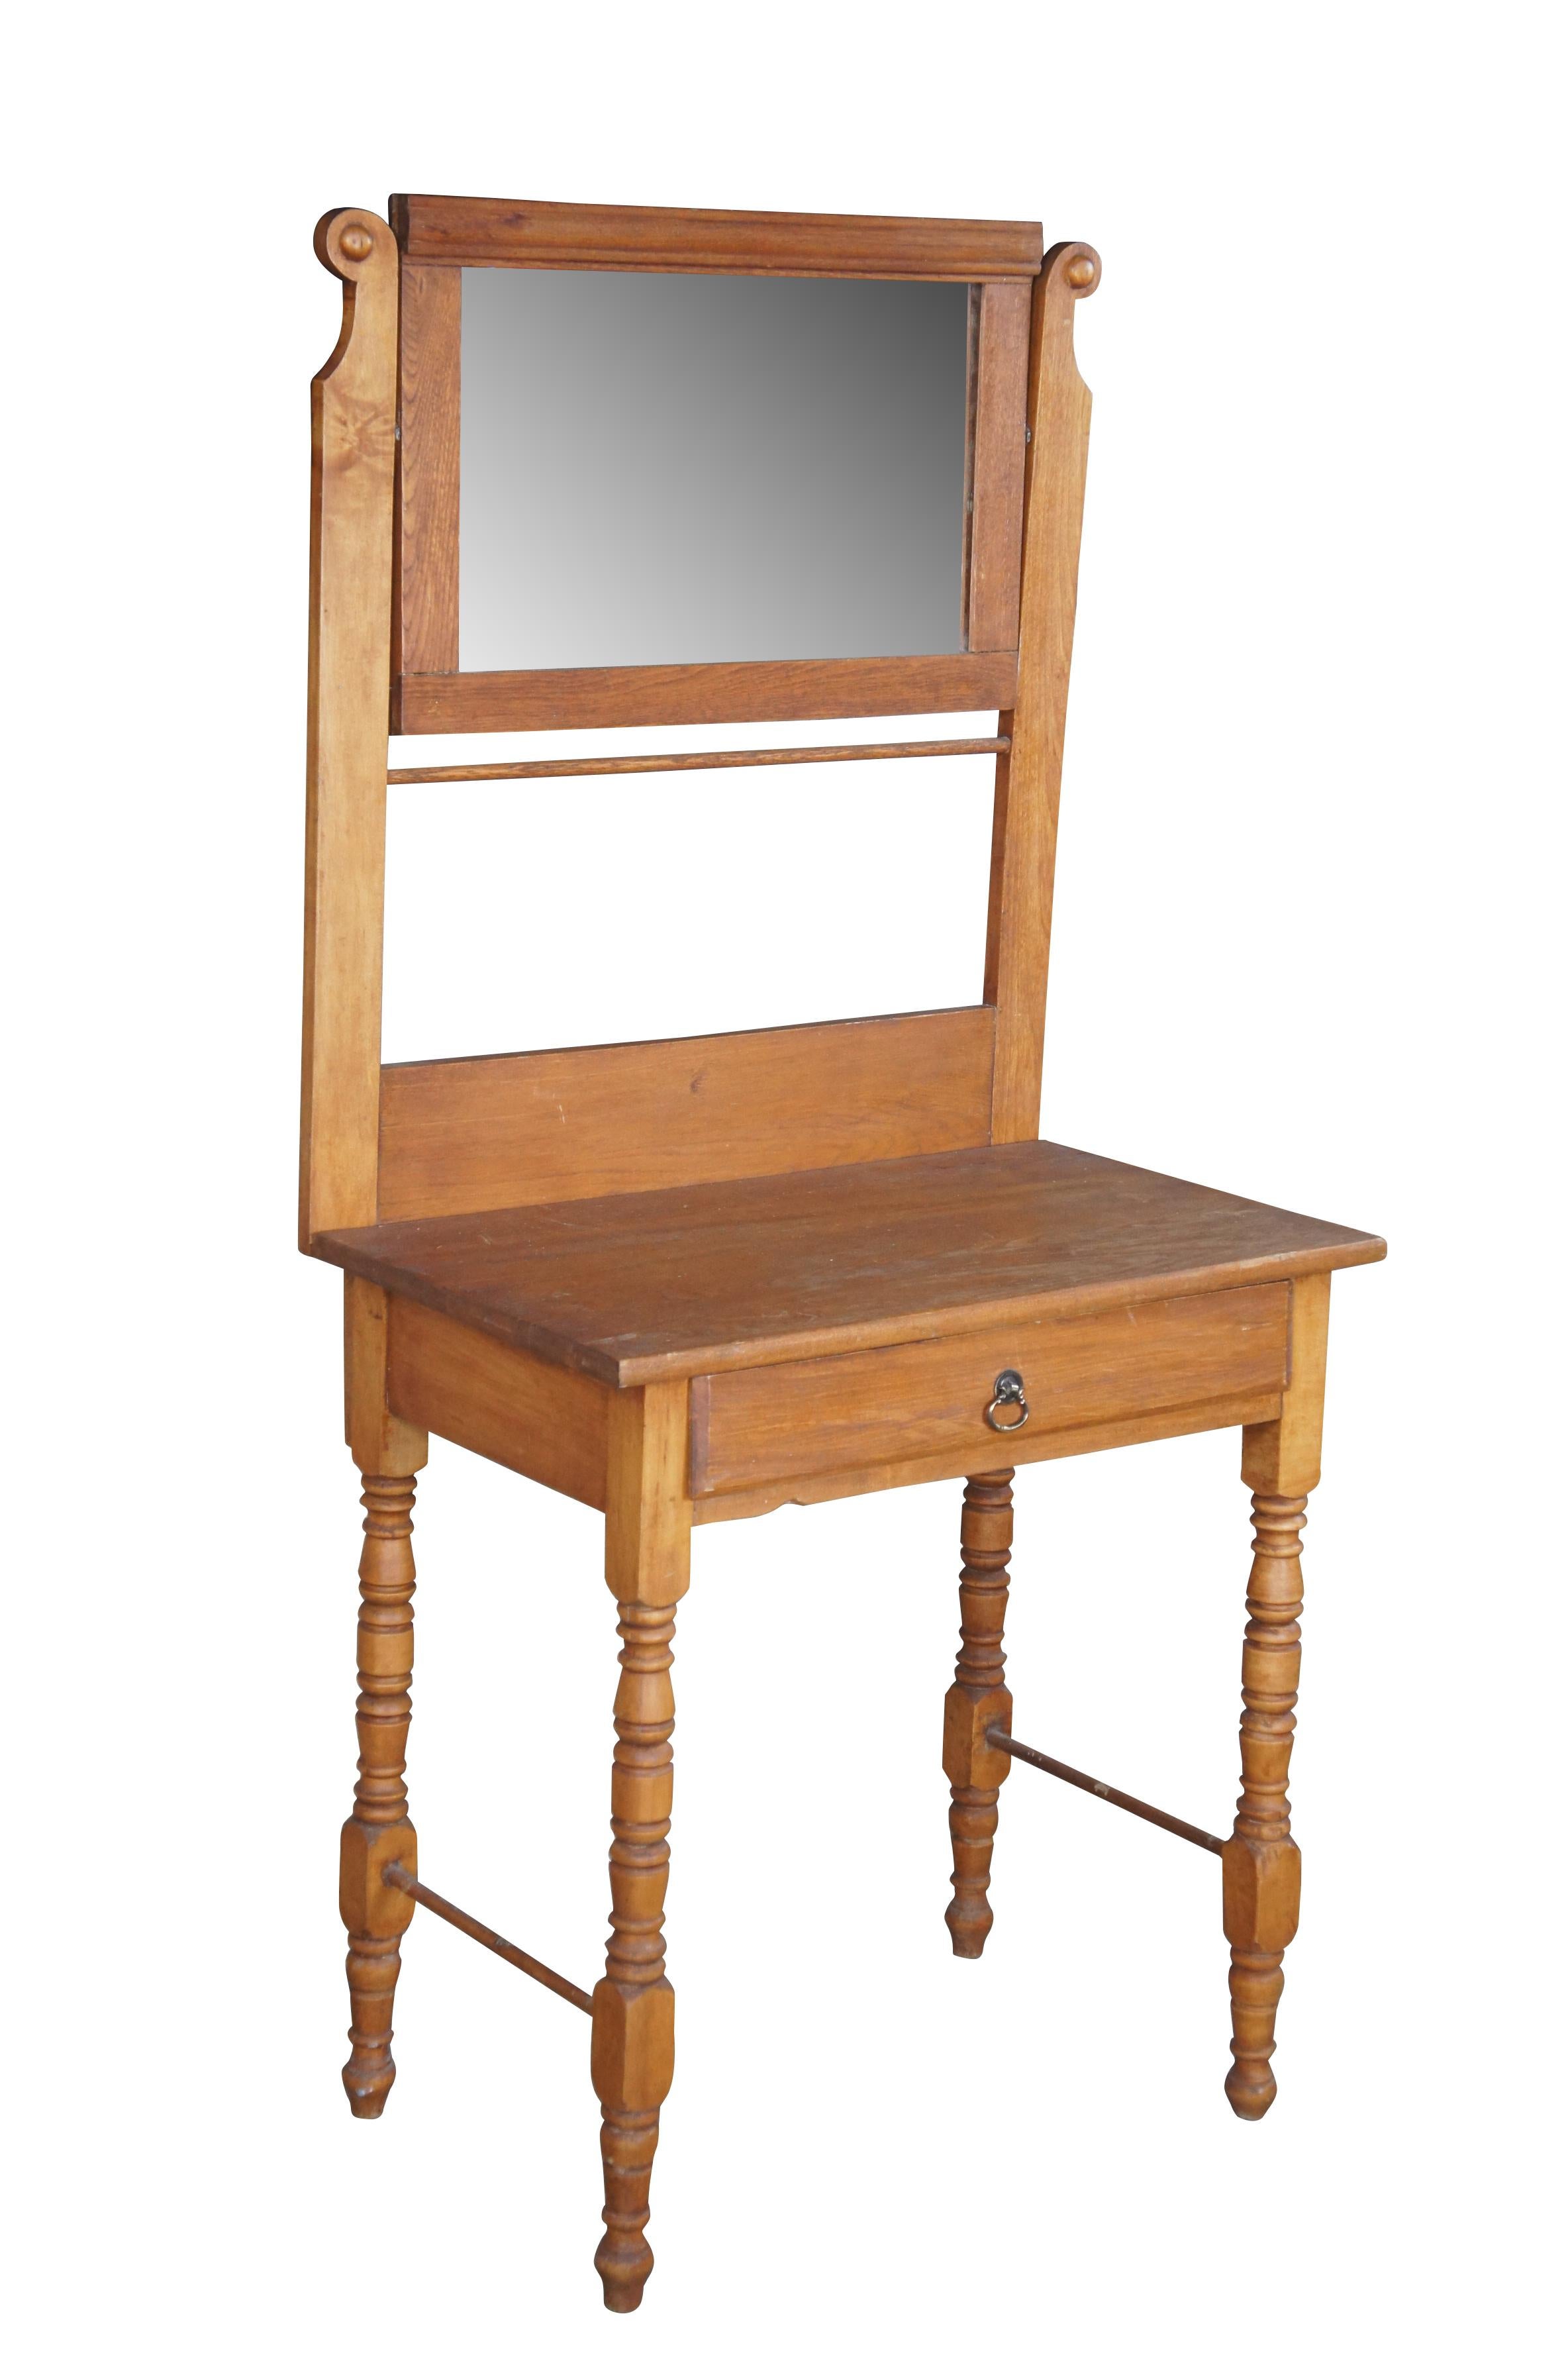 A quaint late Victorian washstand, circa 1900.  Made from oak with a high back featuring a swivel mirror and towel bar.  The base has one interior shelf with brass pull and is supported by turned legs.

Dimensions:
57